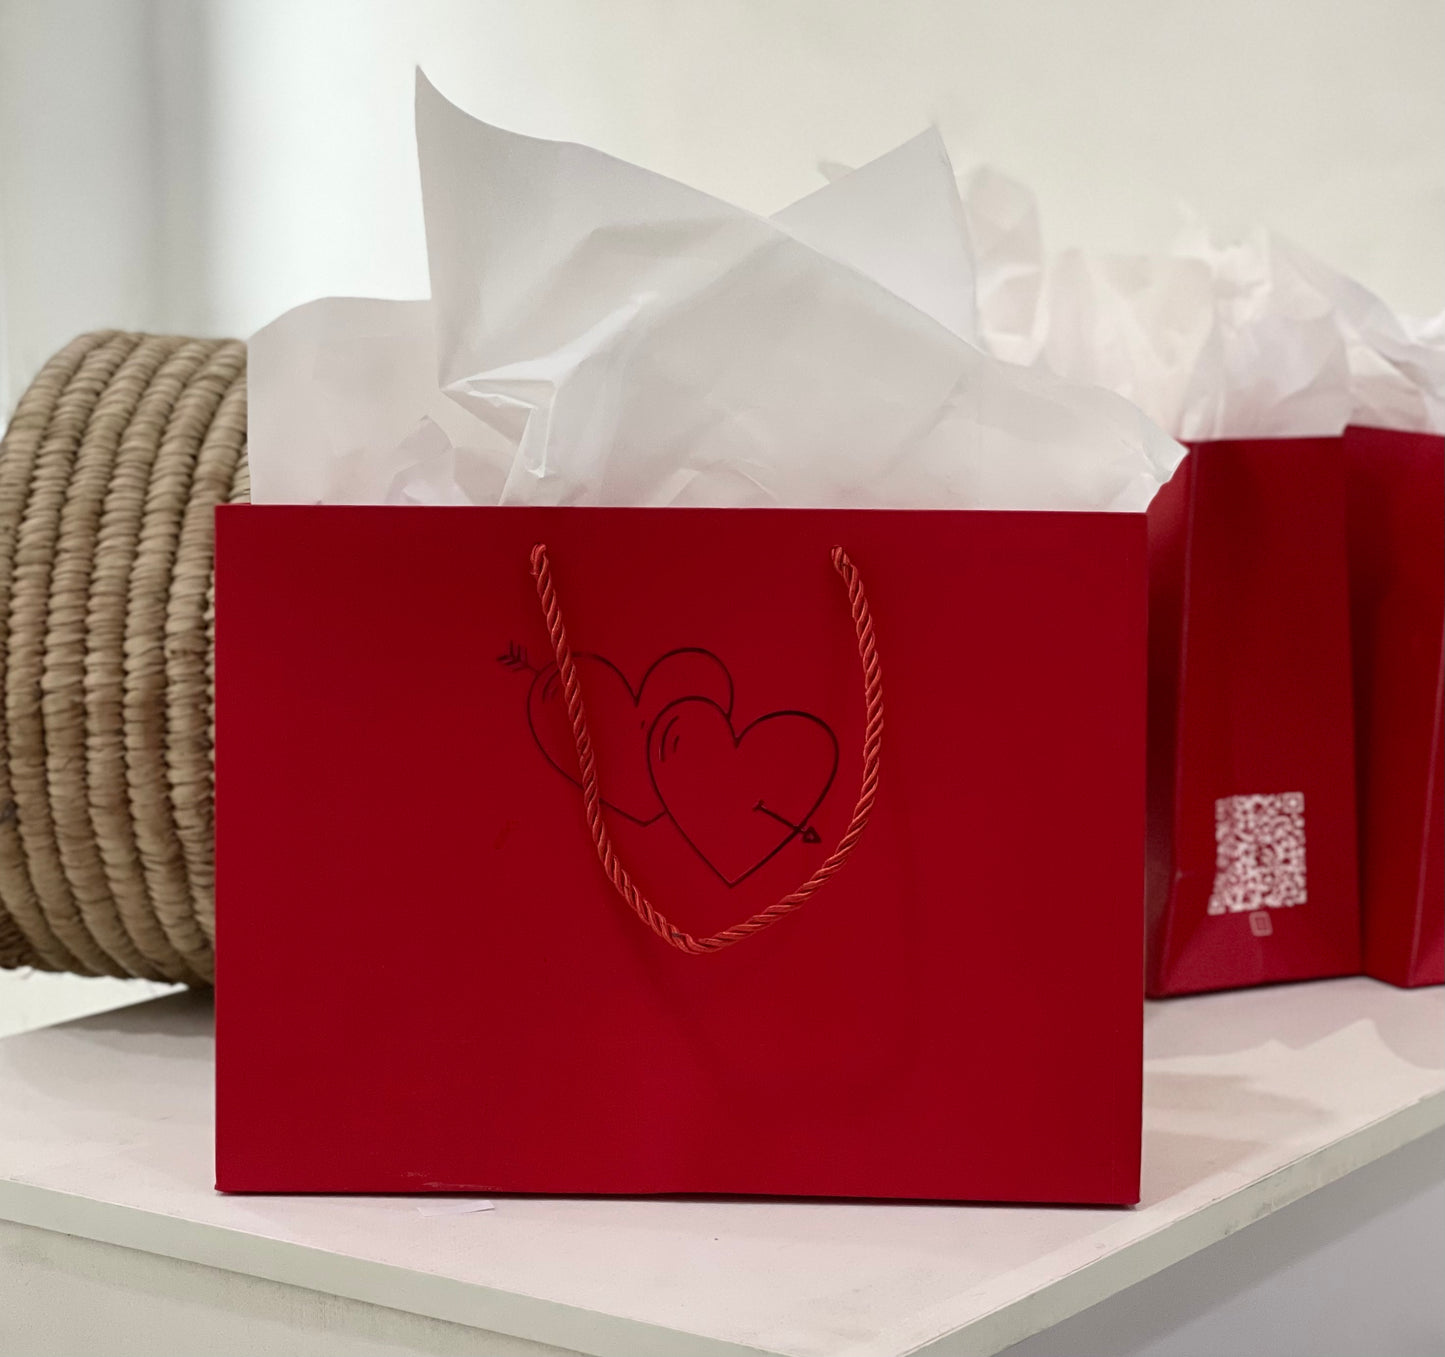 Cupid hearts Gift bag (comes in a protective mail box)